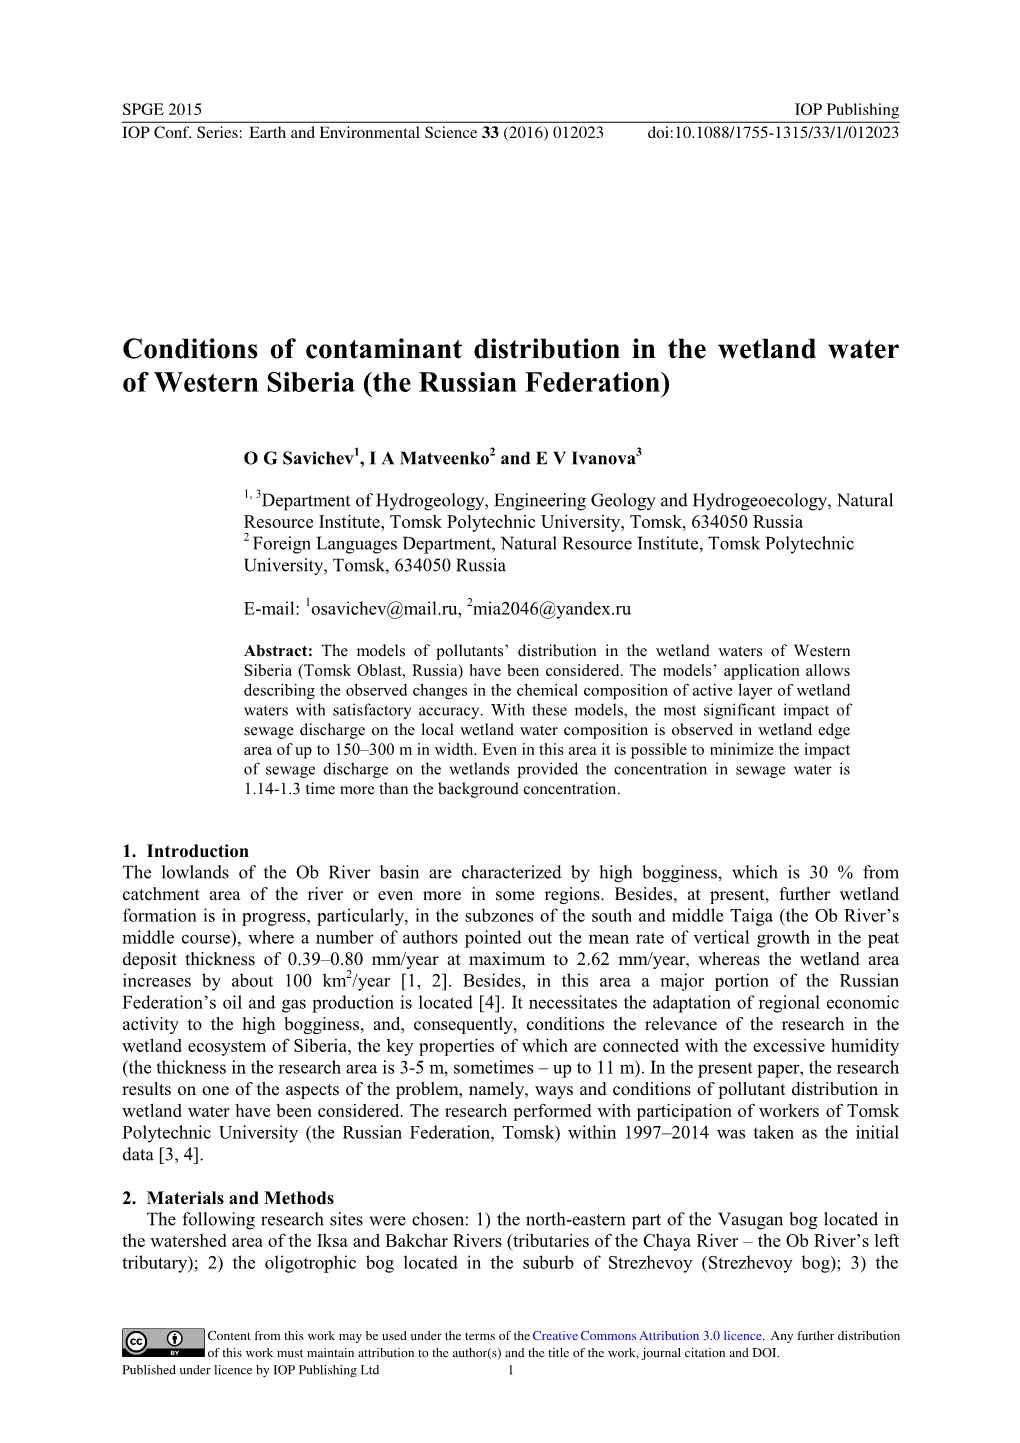 Conditions of Contaminant Distribution in the Wetland Water of Western Siberia (The Russian Federation)